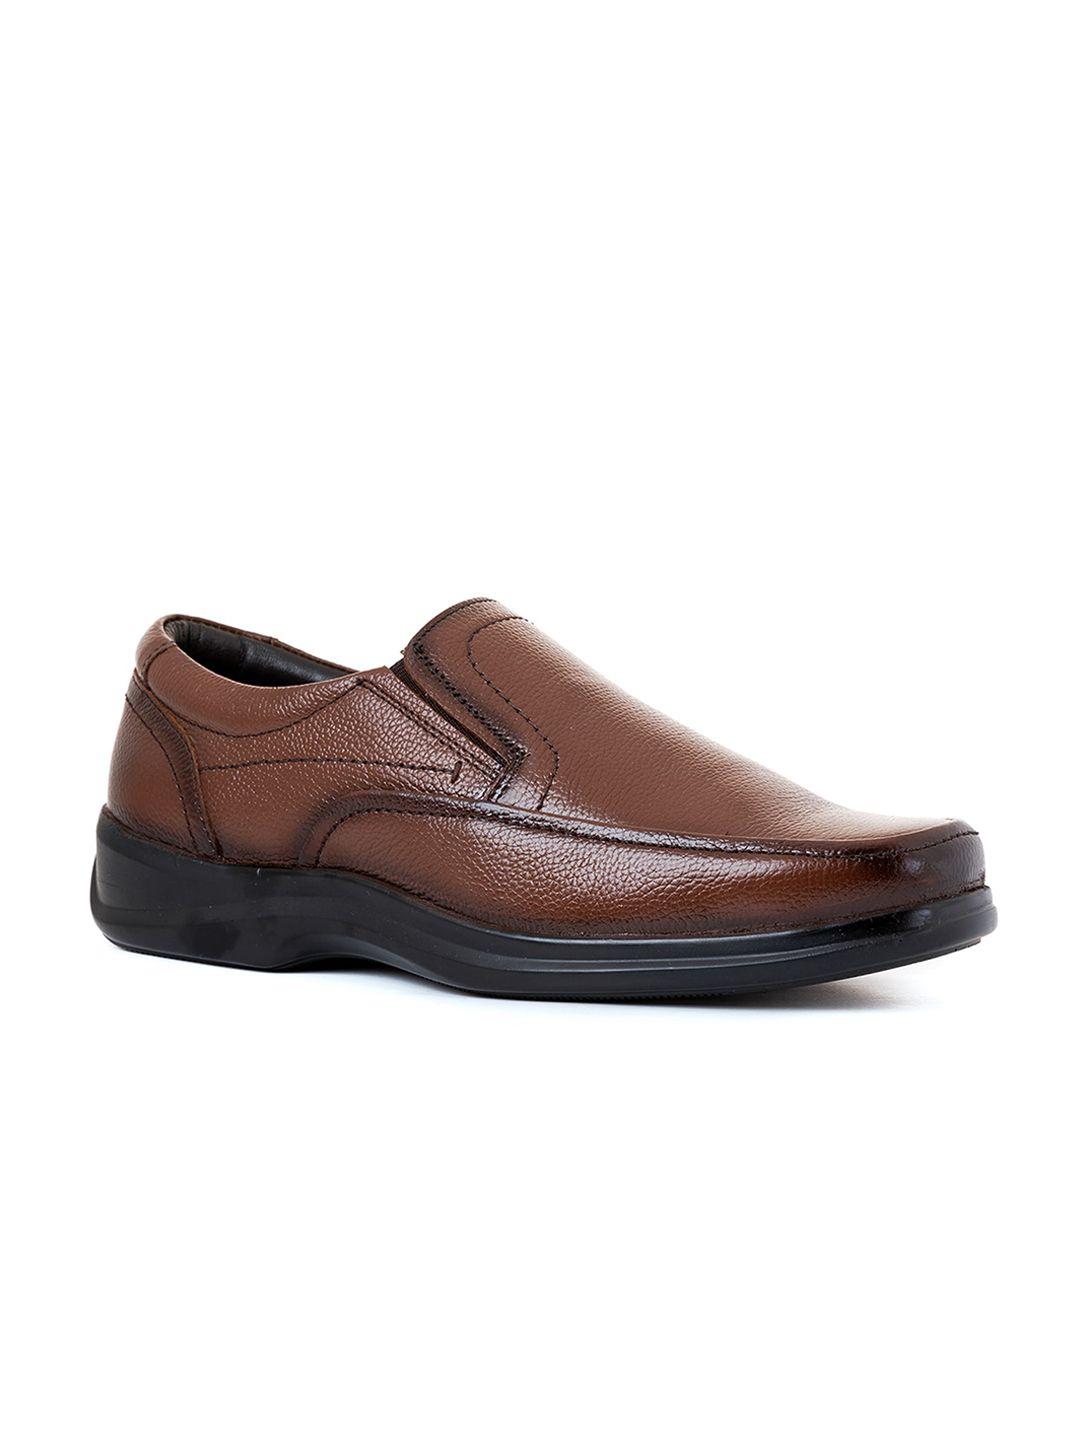 khadims men brown textured leather formal shoes